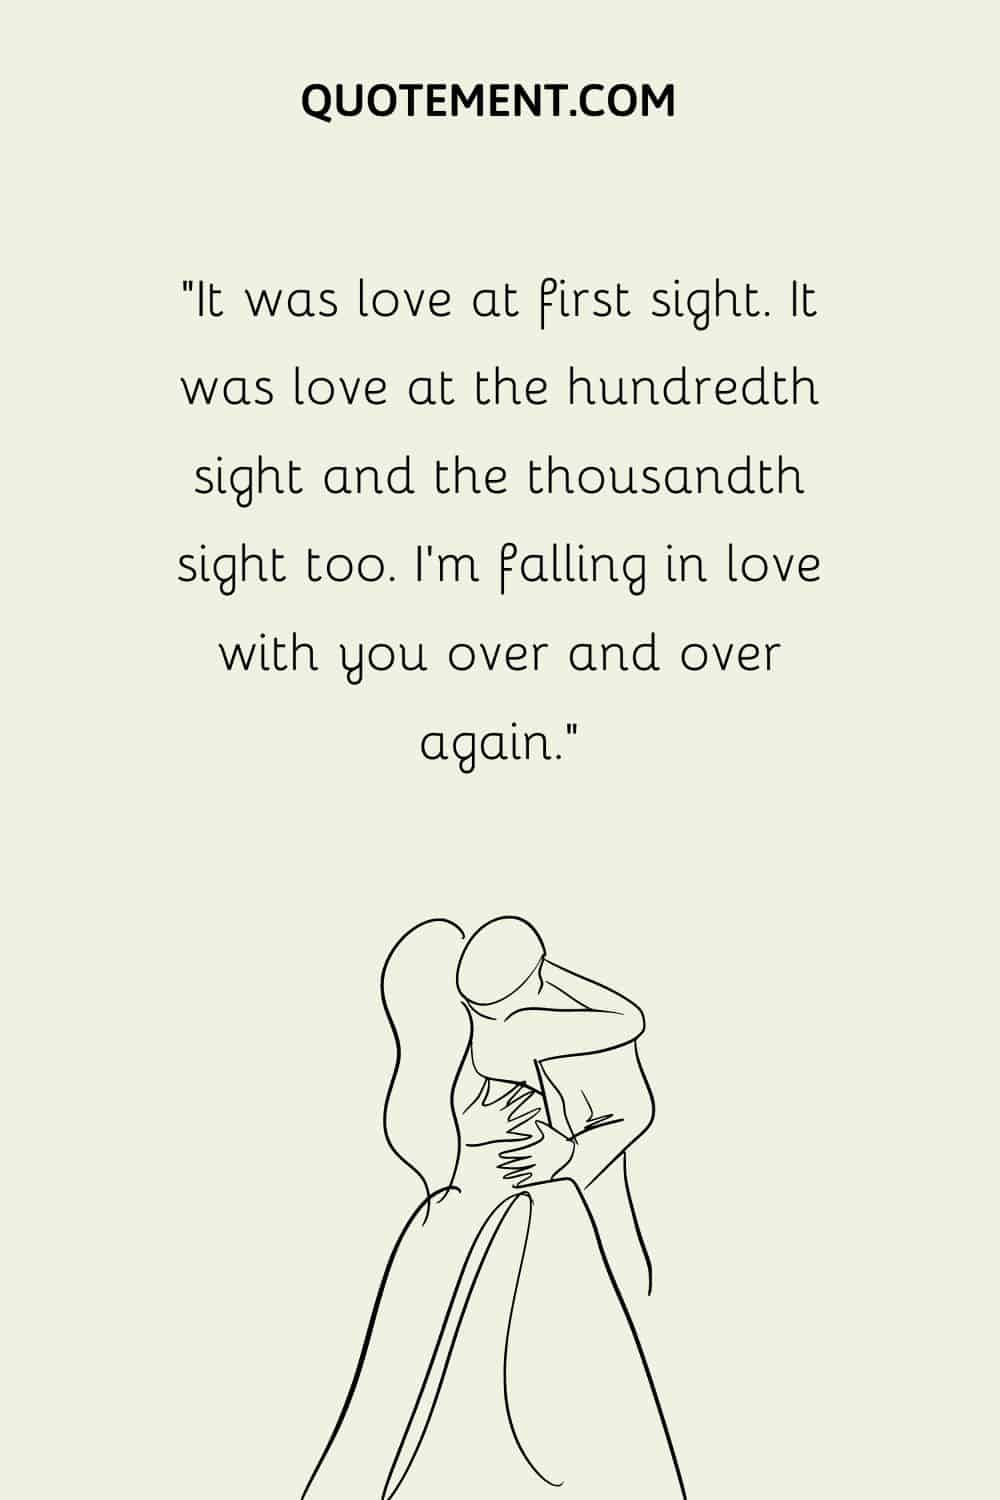 “It was love at first sight. It was love at the hundredth sight and the thousandth sight too. I’m falling in love with you over and over again.”